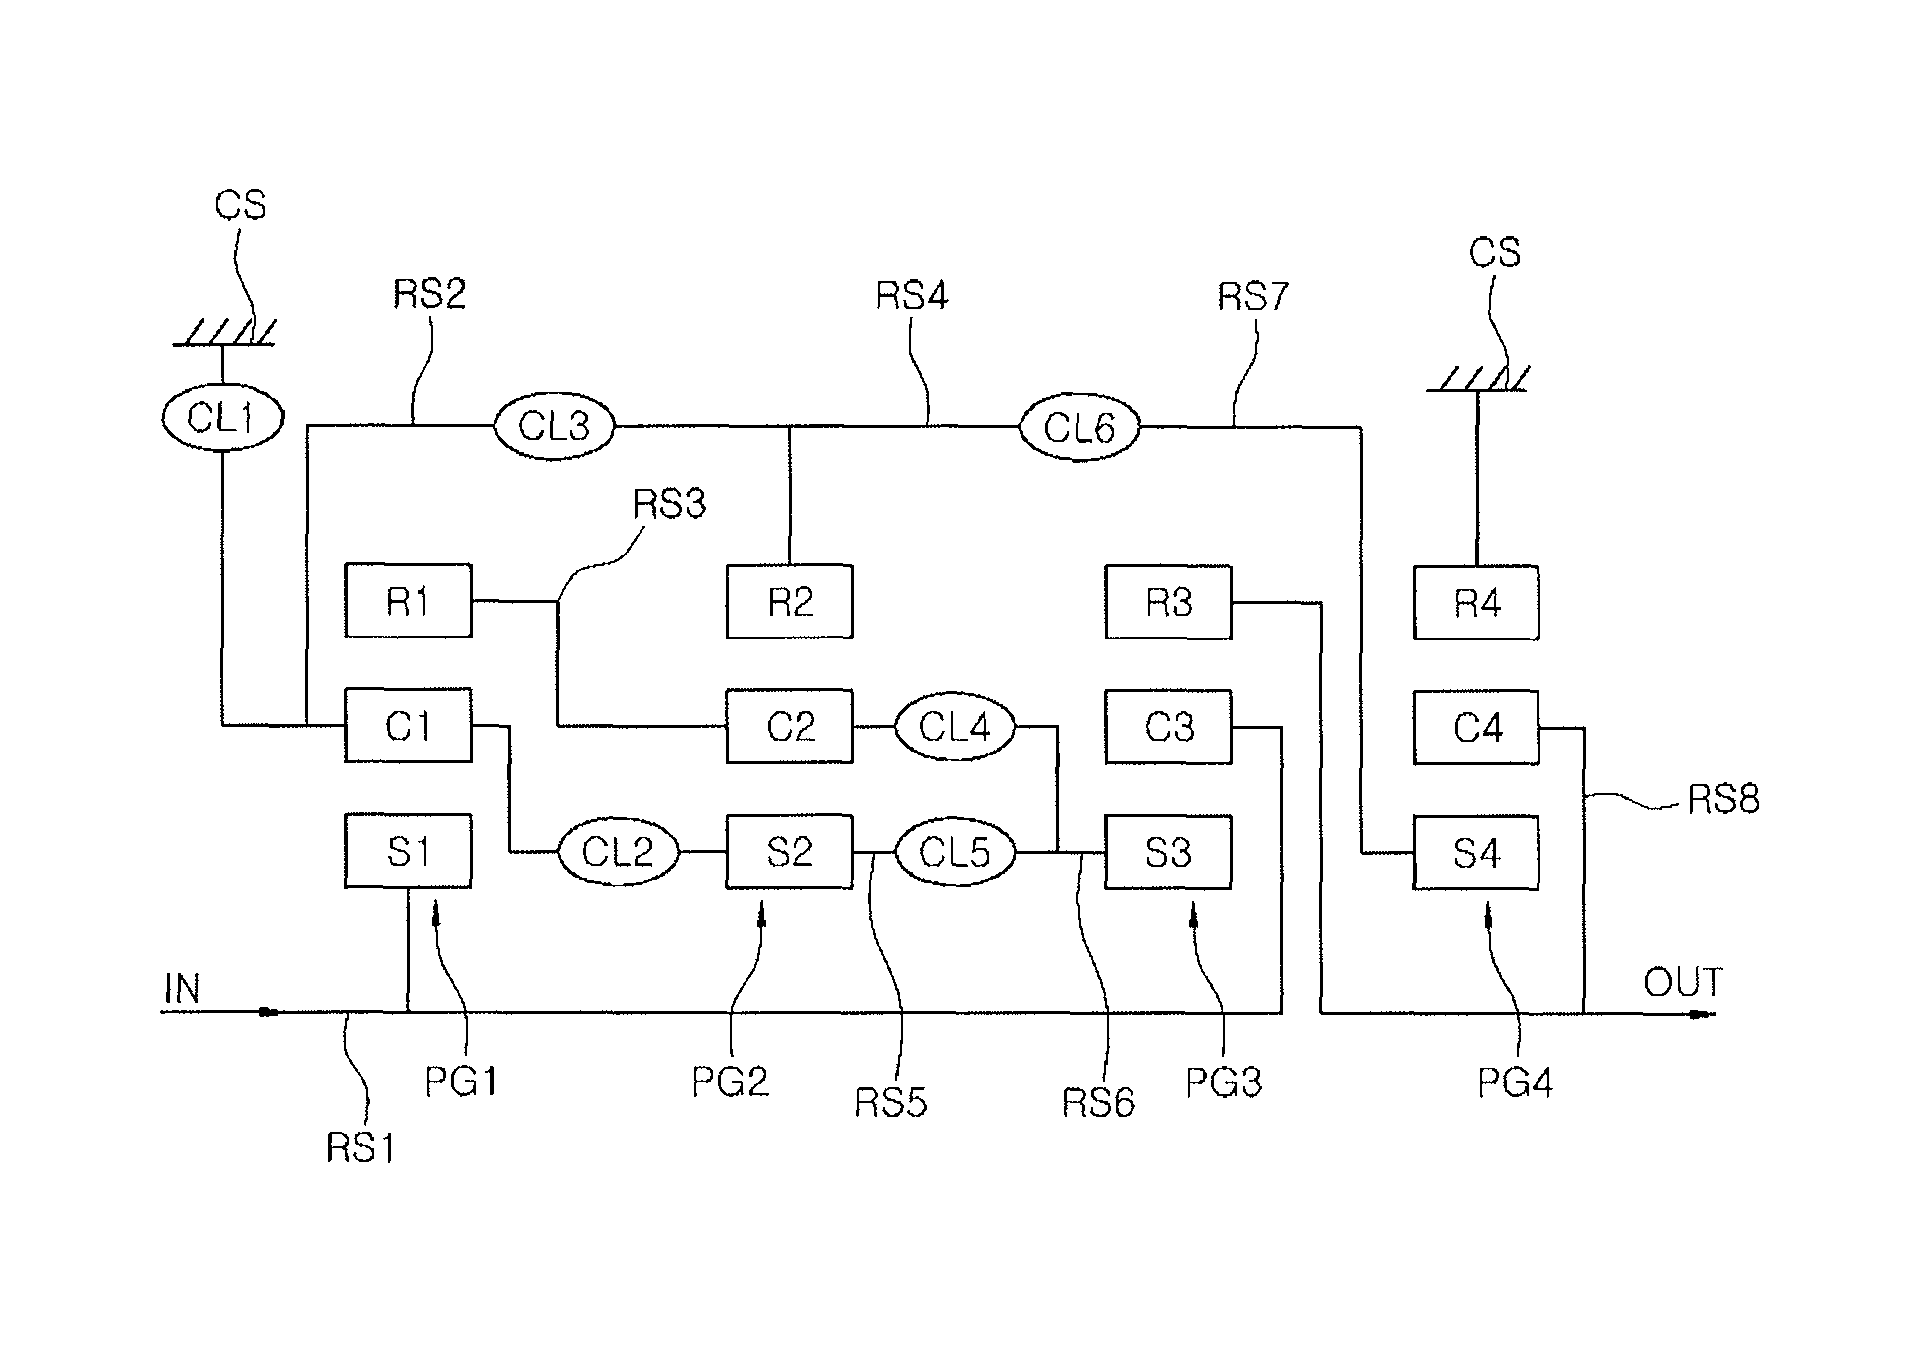 Multi-stage transmission for vehicle